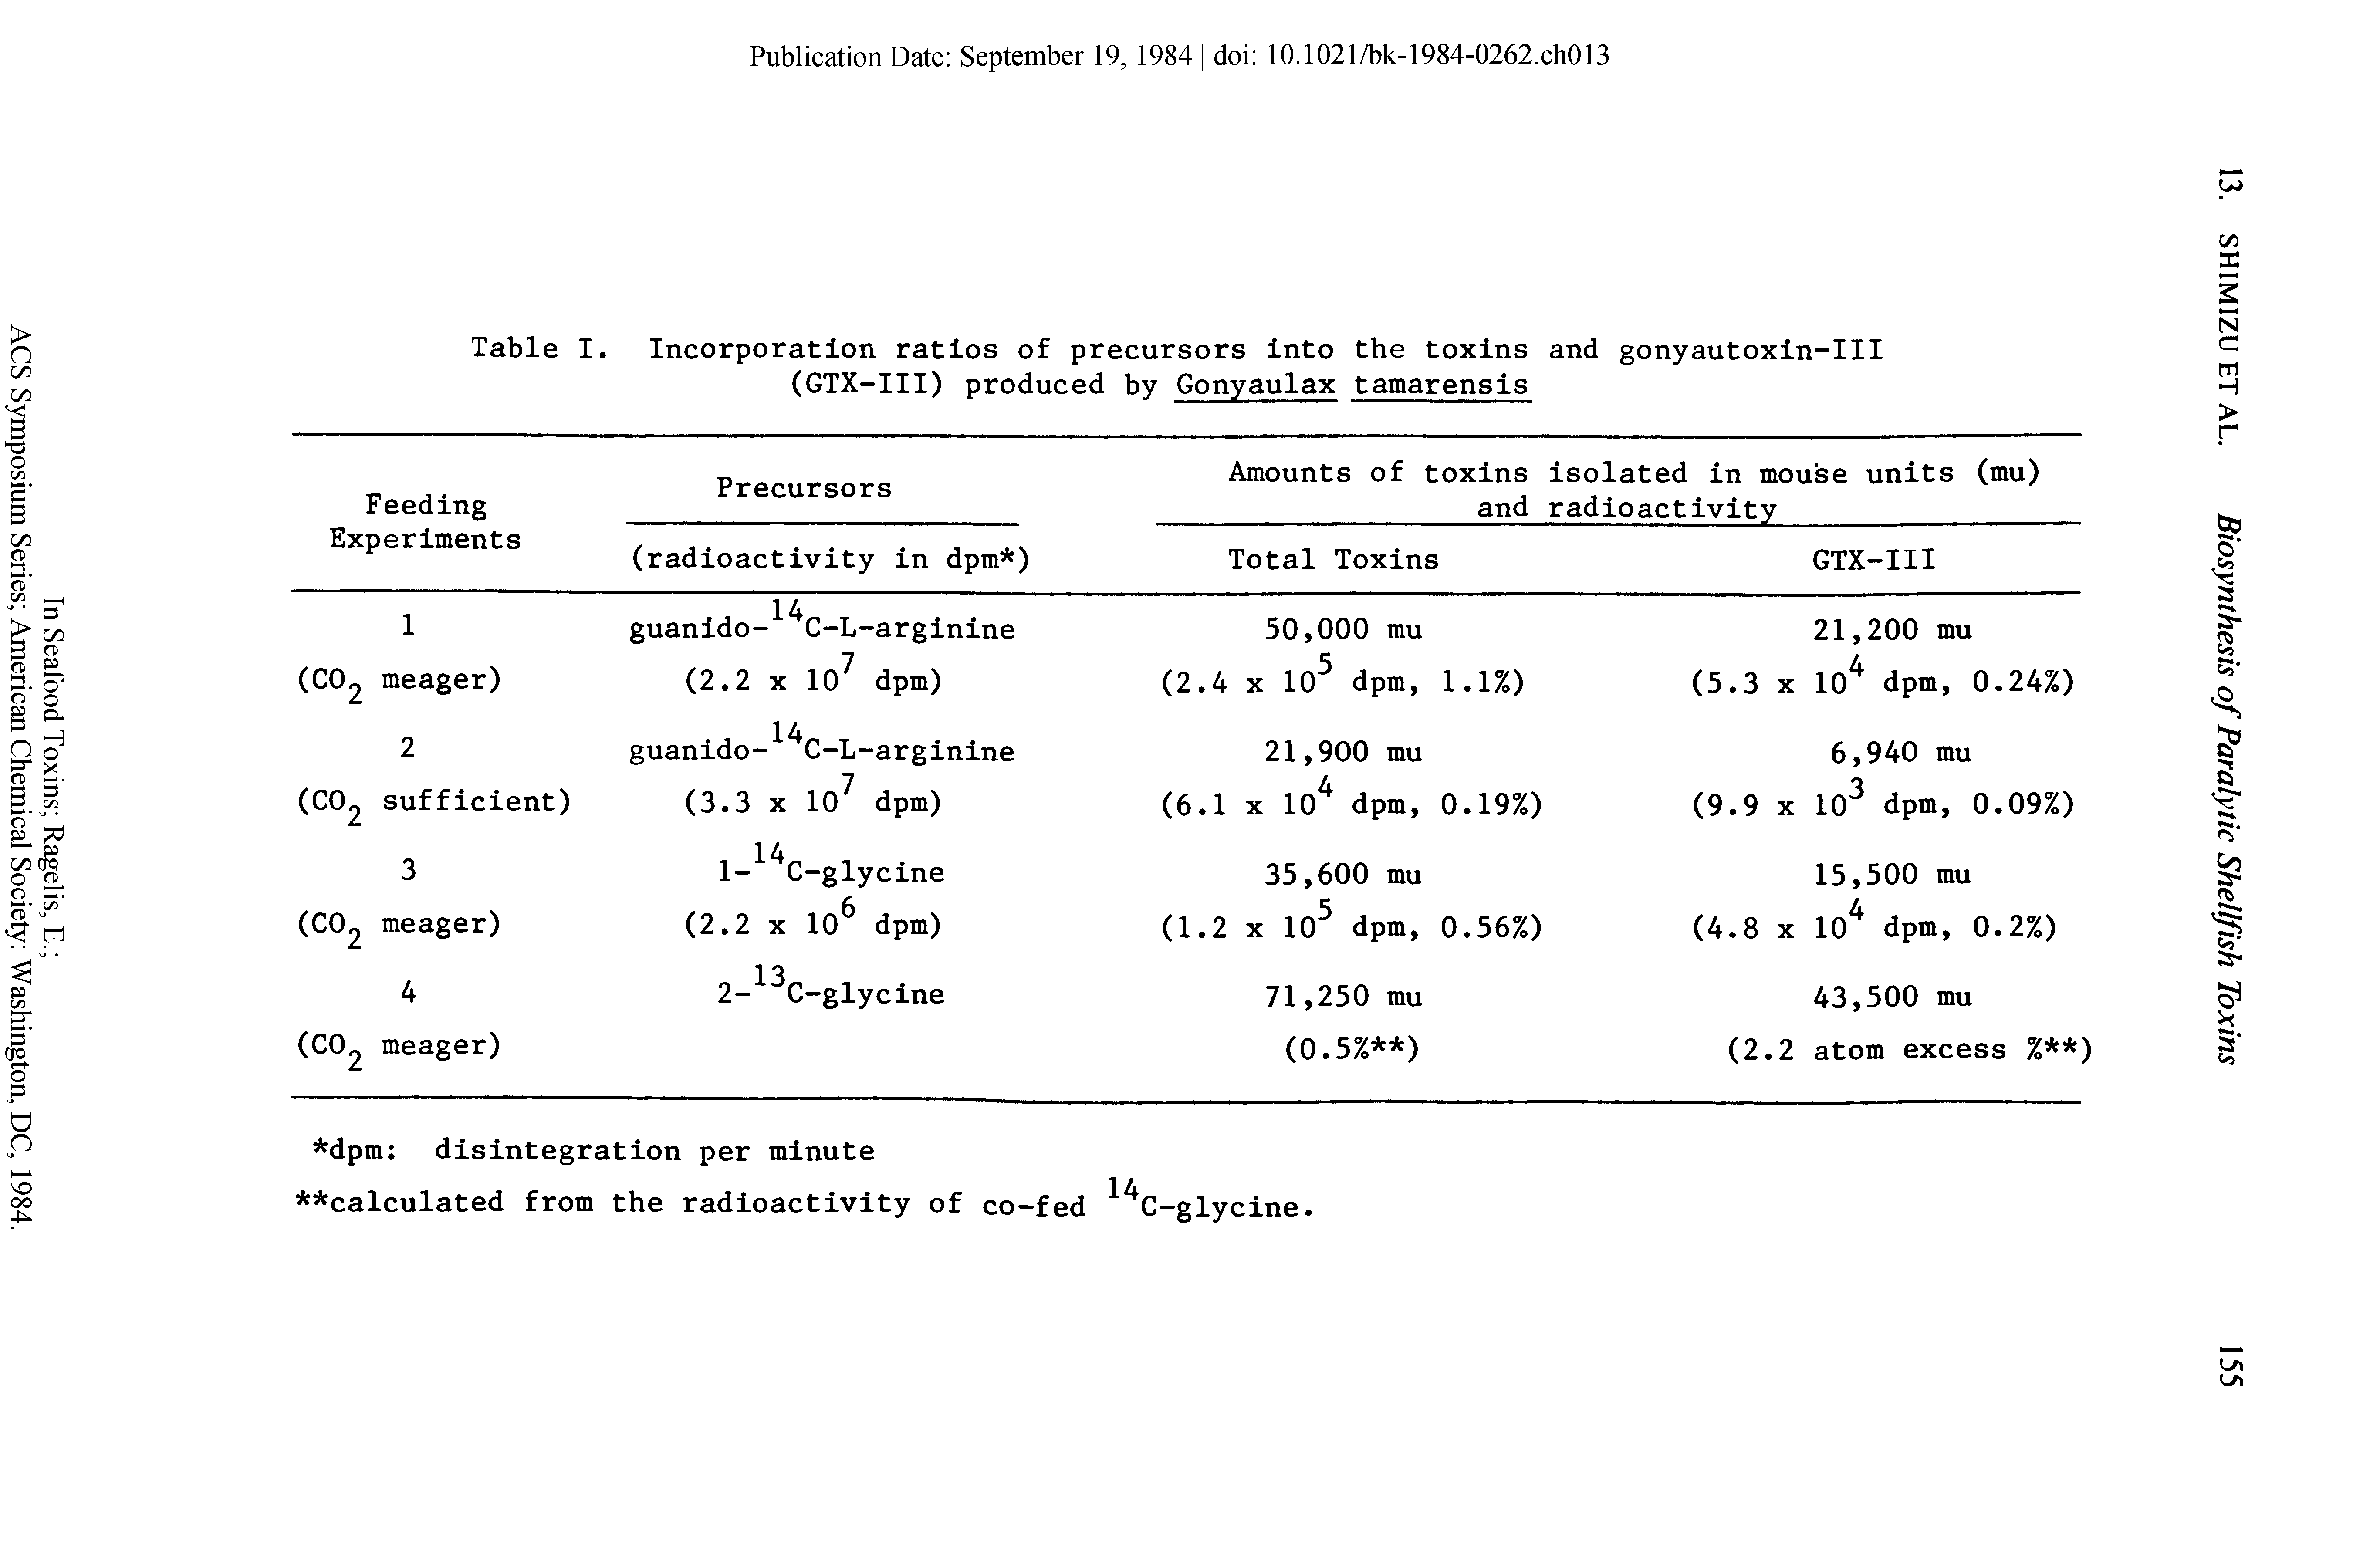 Table I. Incorporation ratios of precursors into the toxins and gonyautoxin-III (GTX-III) produced by Gonyaulax tamarensis...